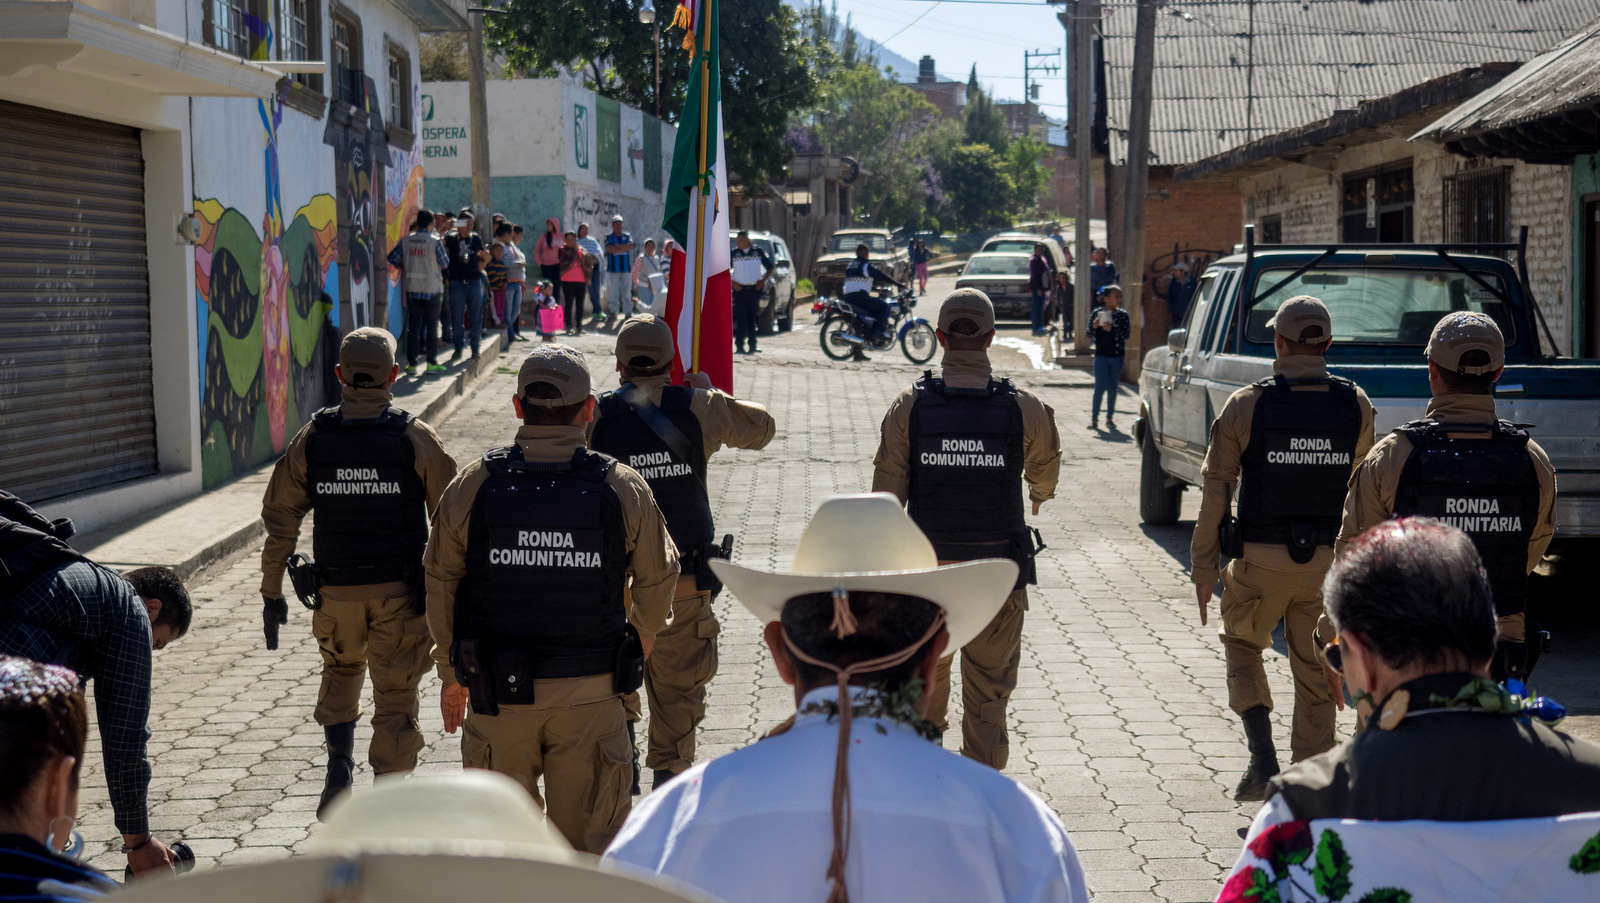 Cheran’s local police group, known as the Ronda Comunitaria, which replaced the municipal police, lead a march through the town’s four neighborhoods, April 15, 2018. (Photo: José Luis Granados Ceja)